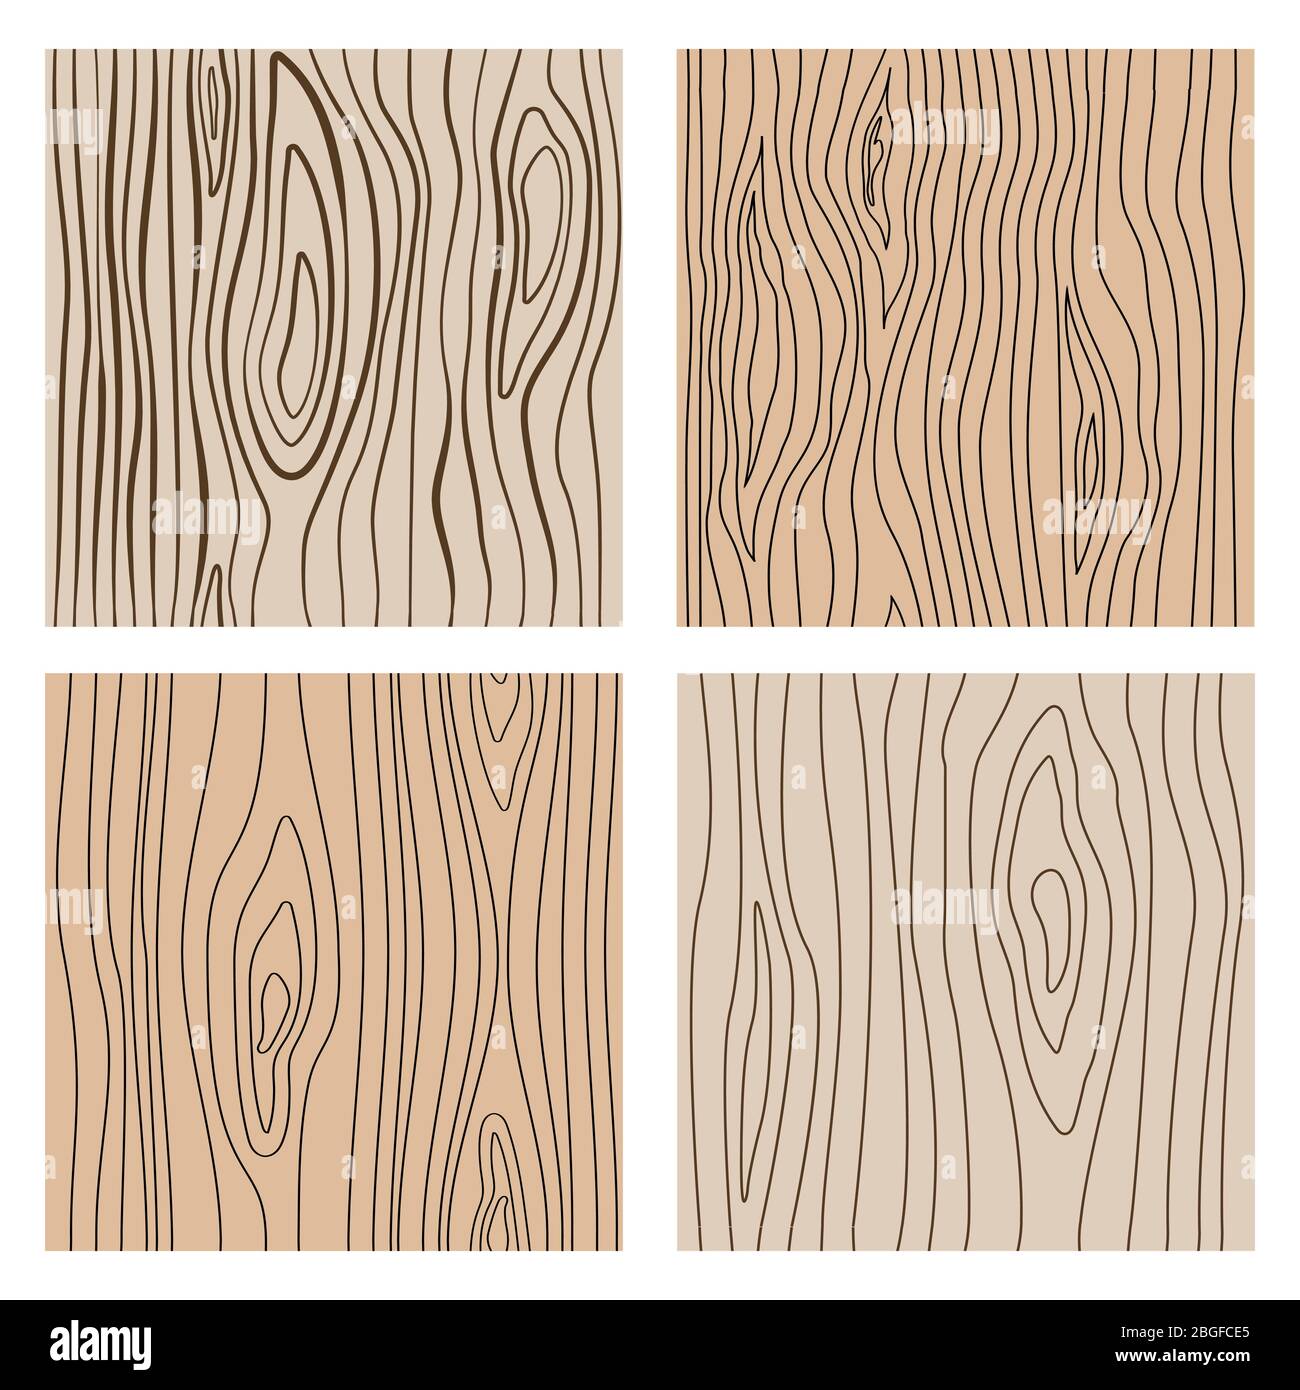 Abstract wood line seamless textures. Repeating wooden decoration vector background. Wood texture pattern material, natural panel board surface illustration Stock Vector